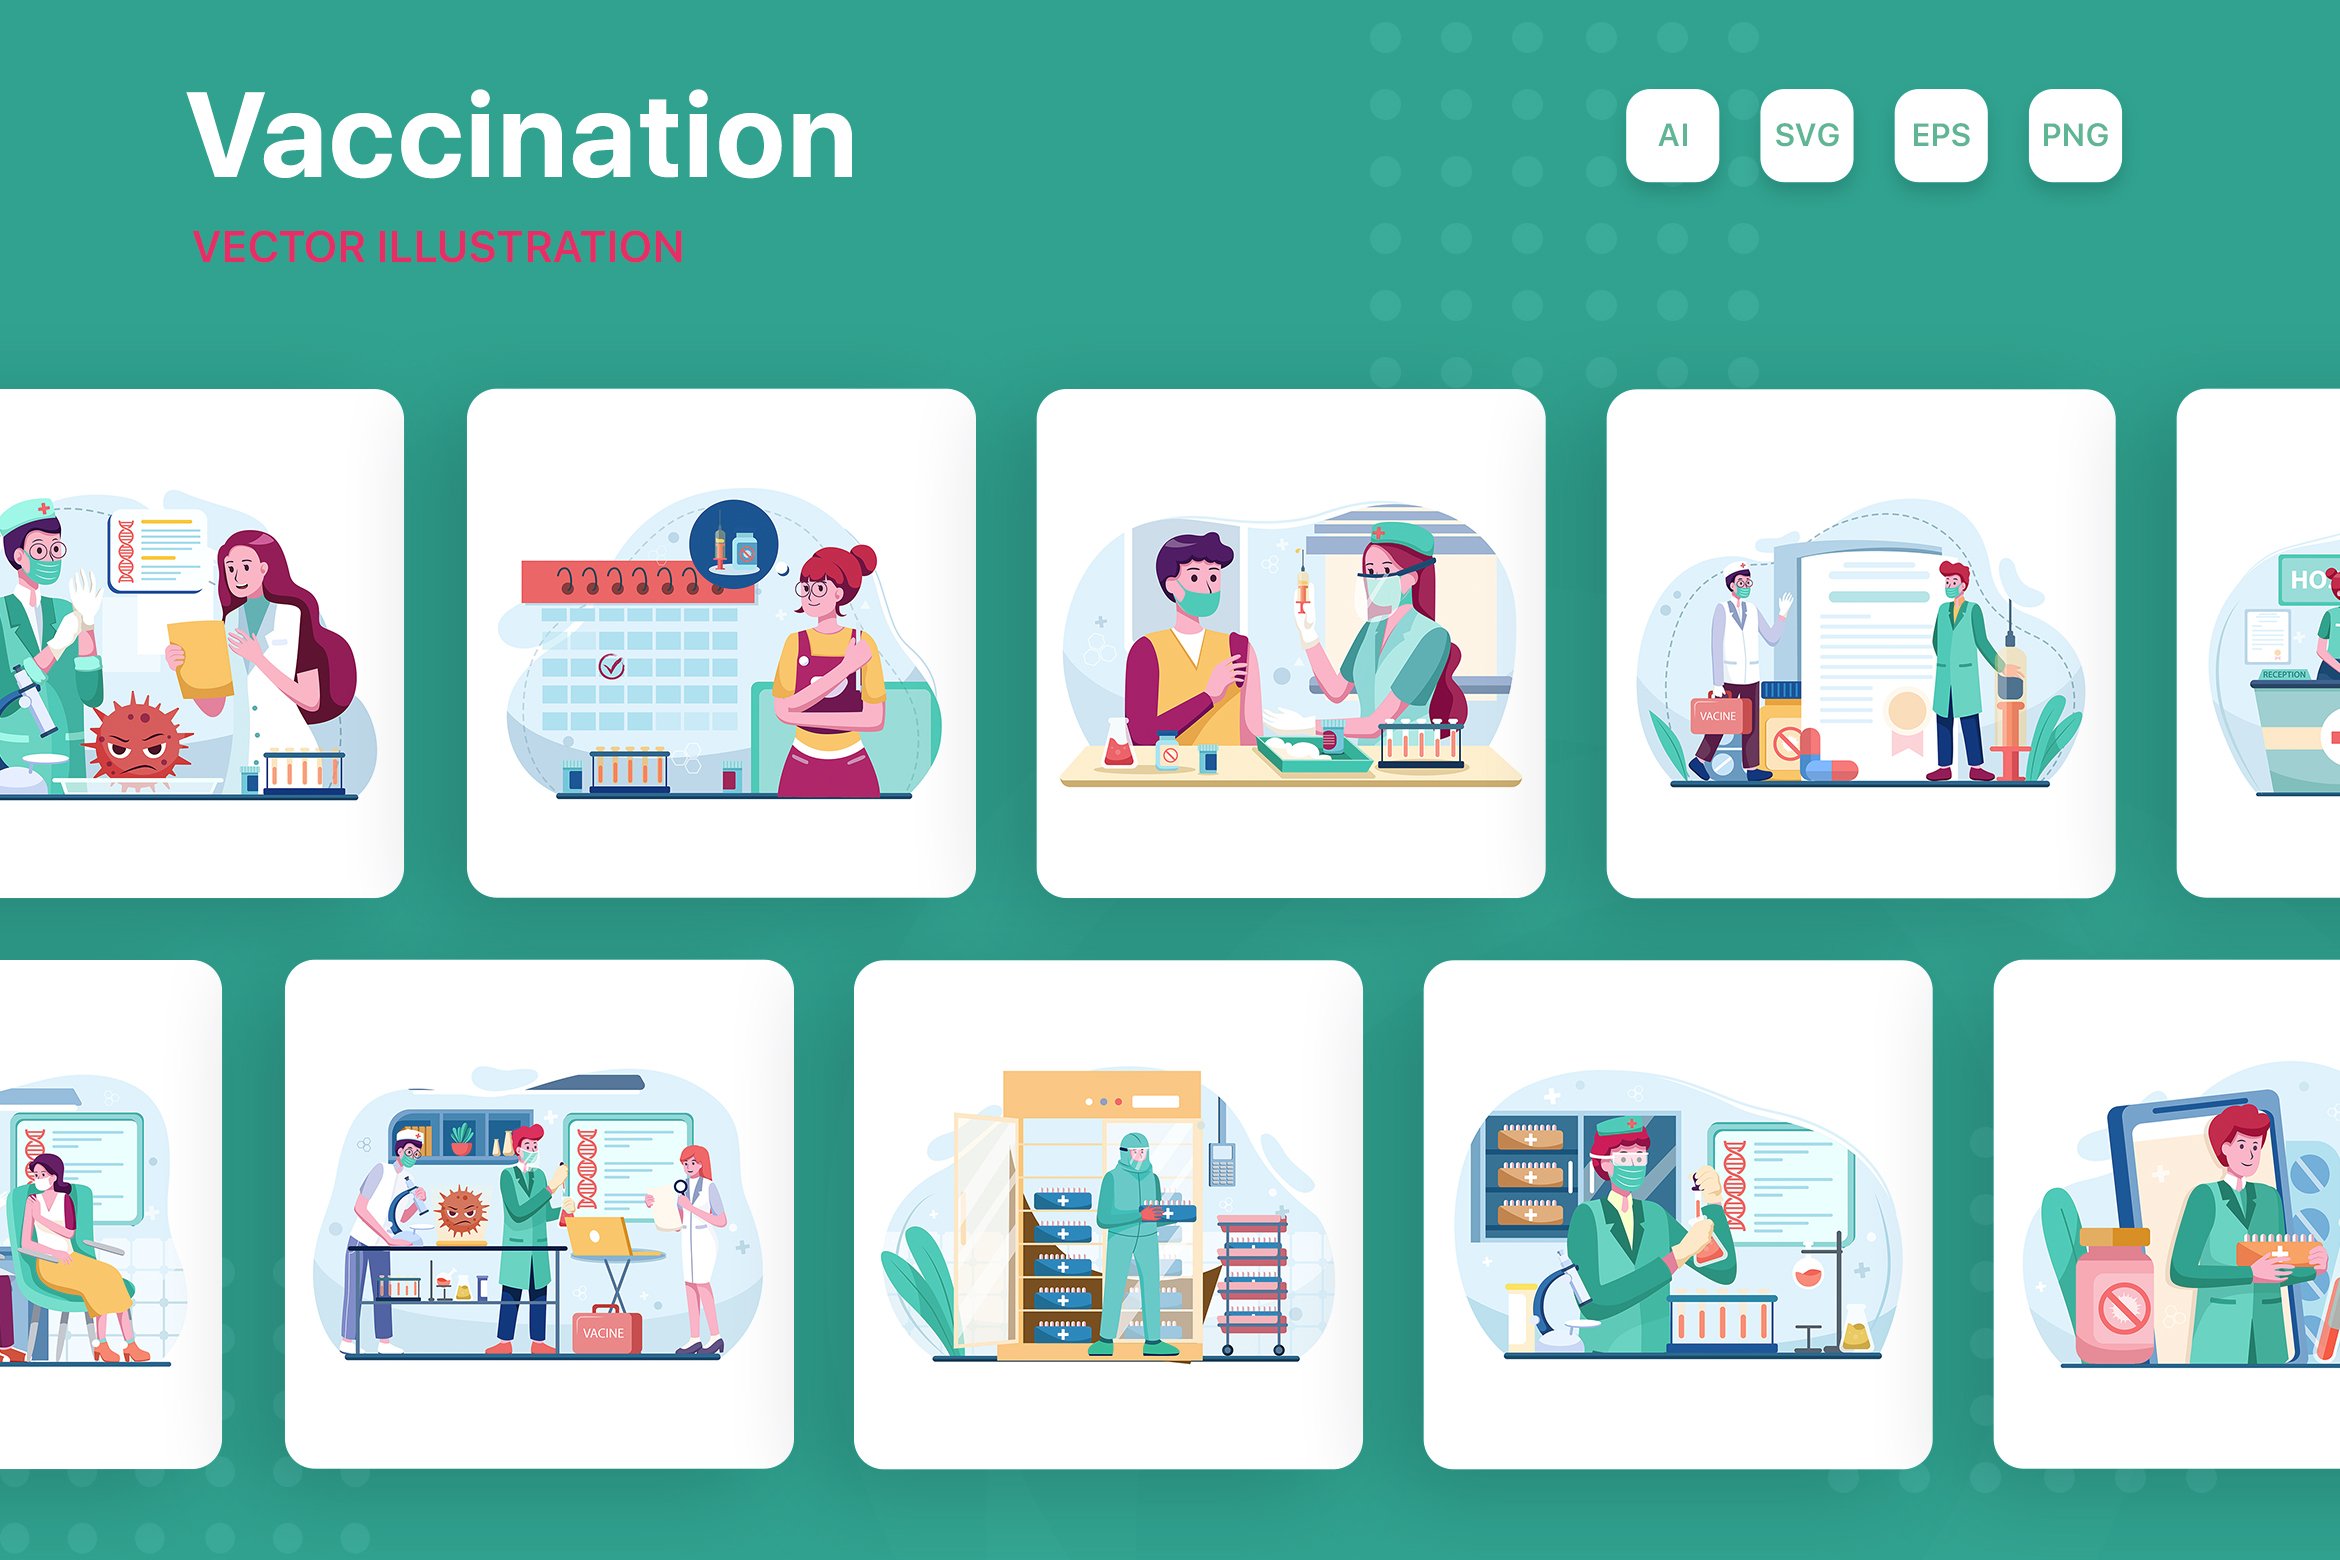 M217_Vaccination Illustrations cover image.